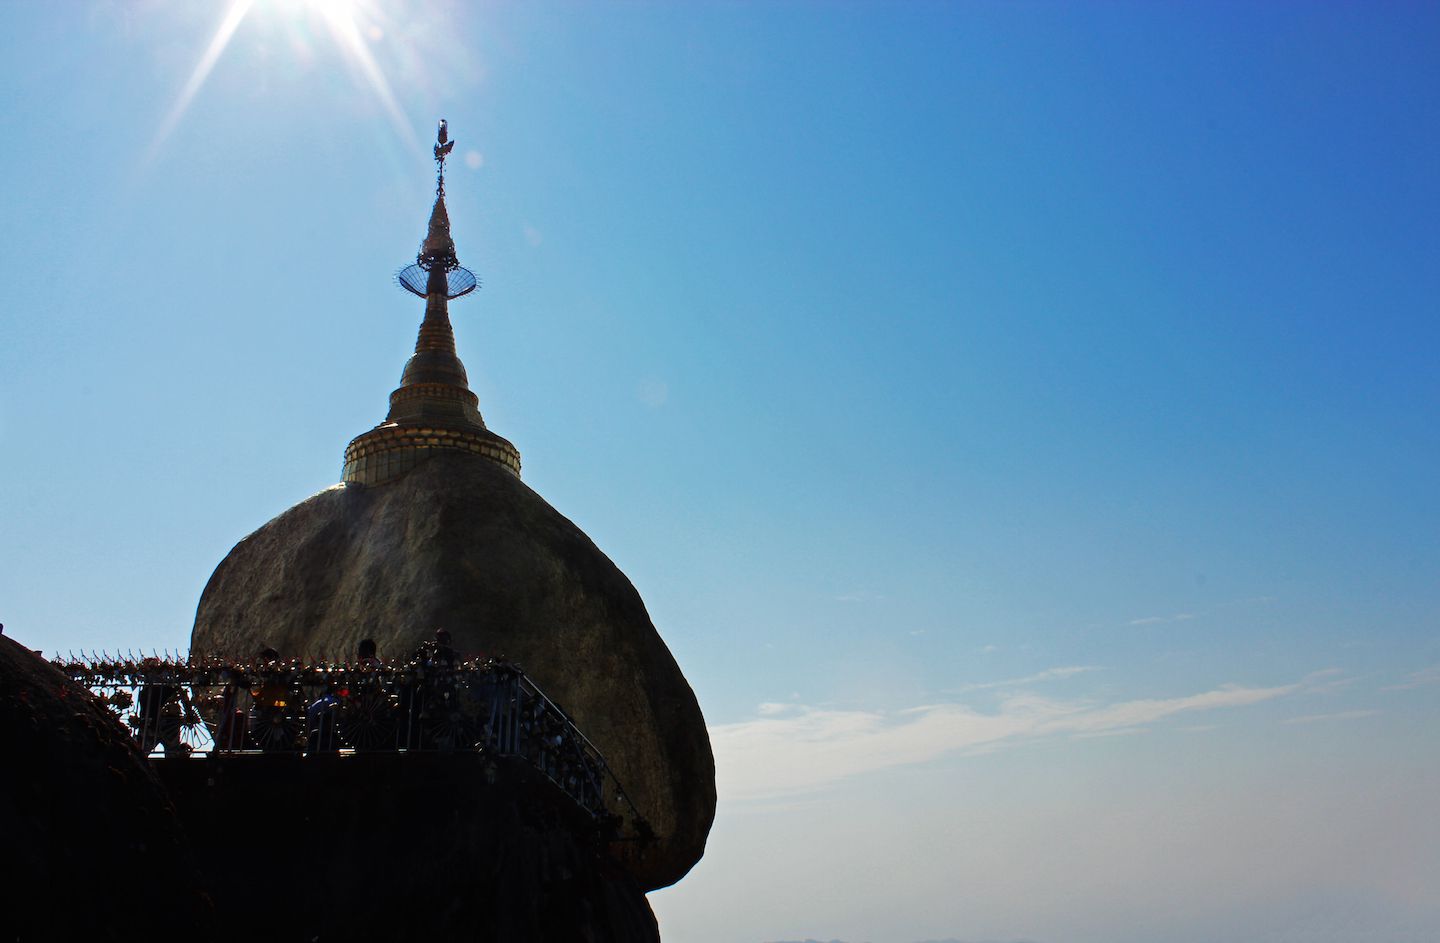 The Golden Rock seems to be on the verge of falling off the cliff, Golden Rock, Myanmar